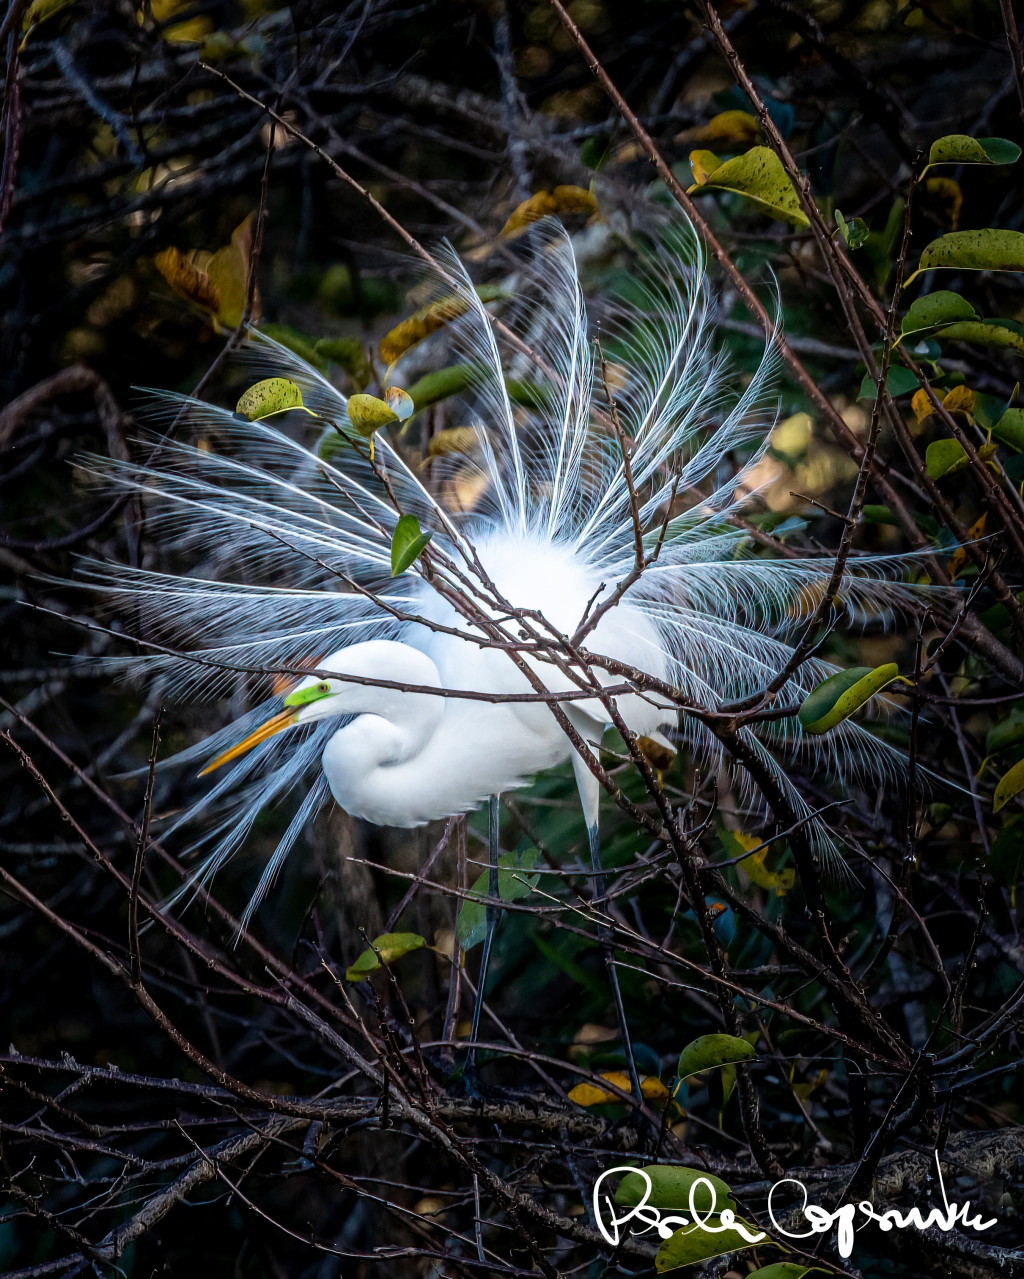 The Stunning Courtship Behavior of The Great Egret, an Unmissable Spectacle!